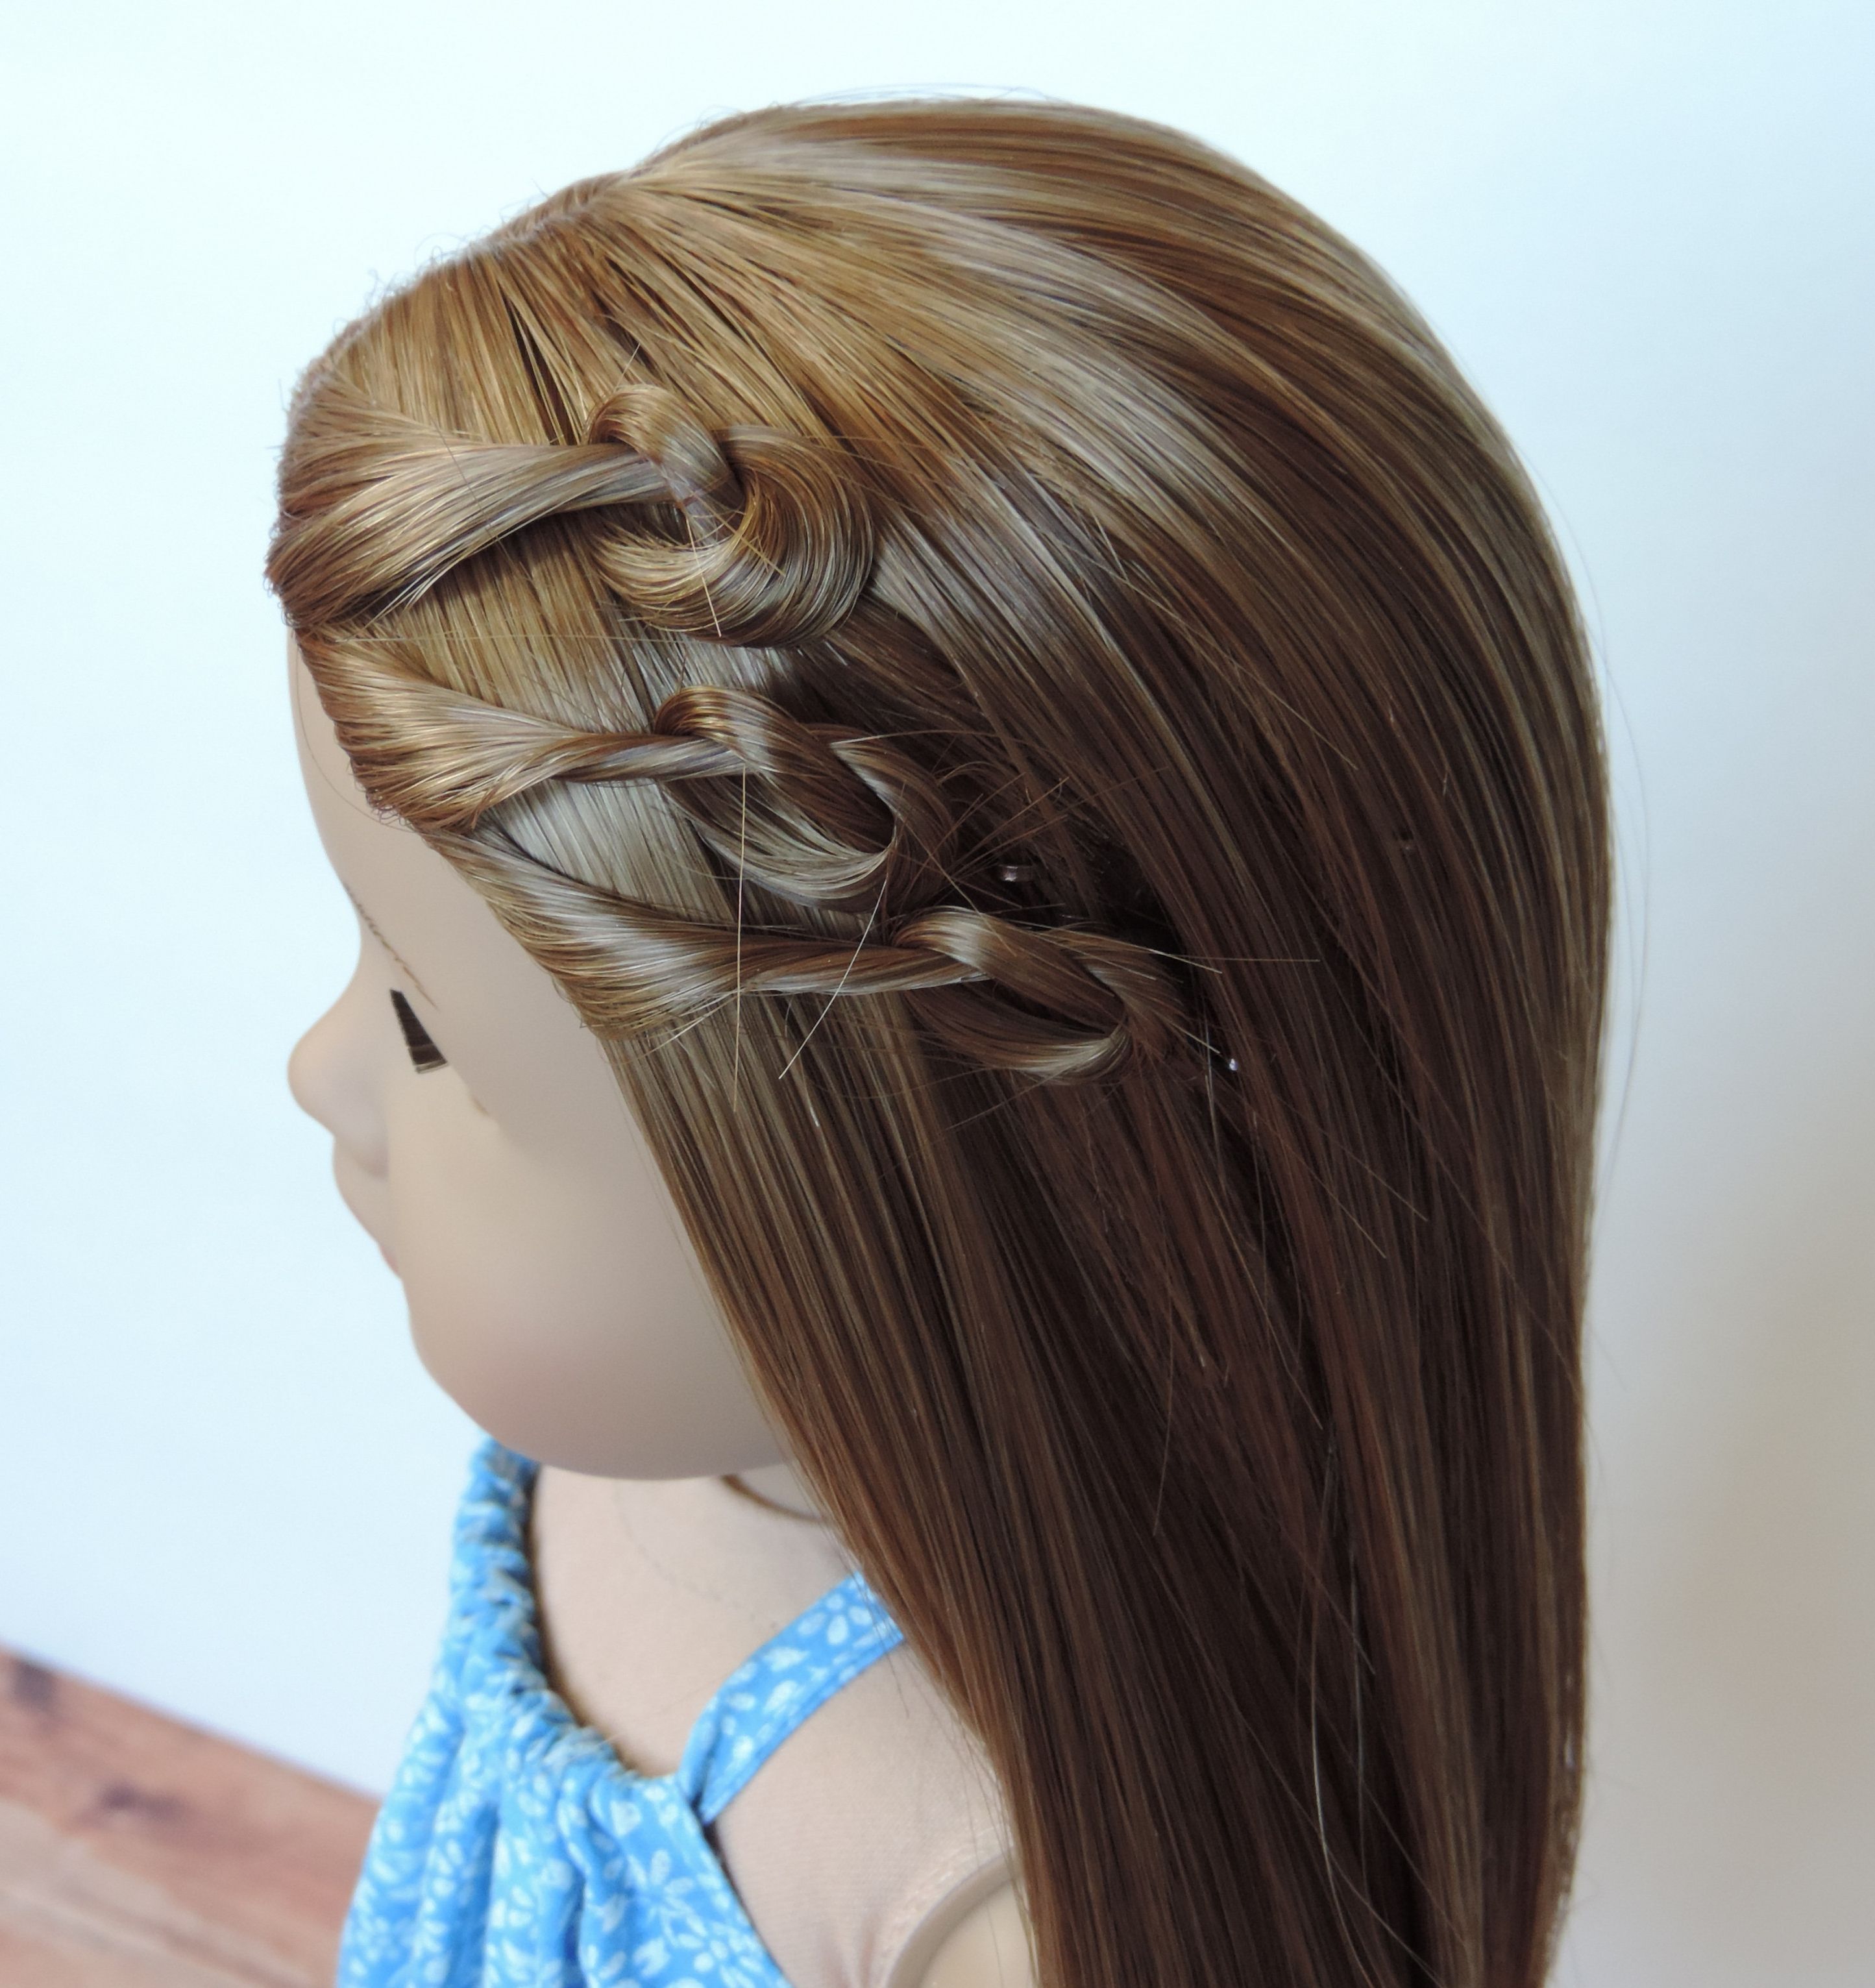 Easy American Girl Doll Hairstyles | Latest Hairstyles And Haircuts With Cute American Girl Doll Hairstyles For Short Hair (View 16 of 25)